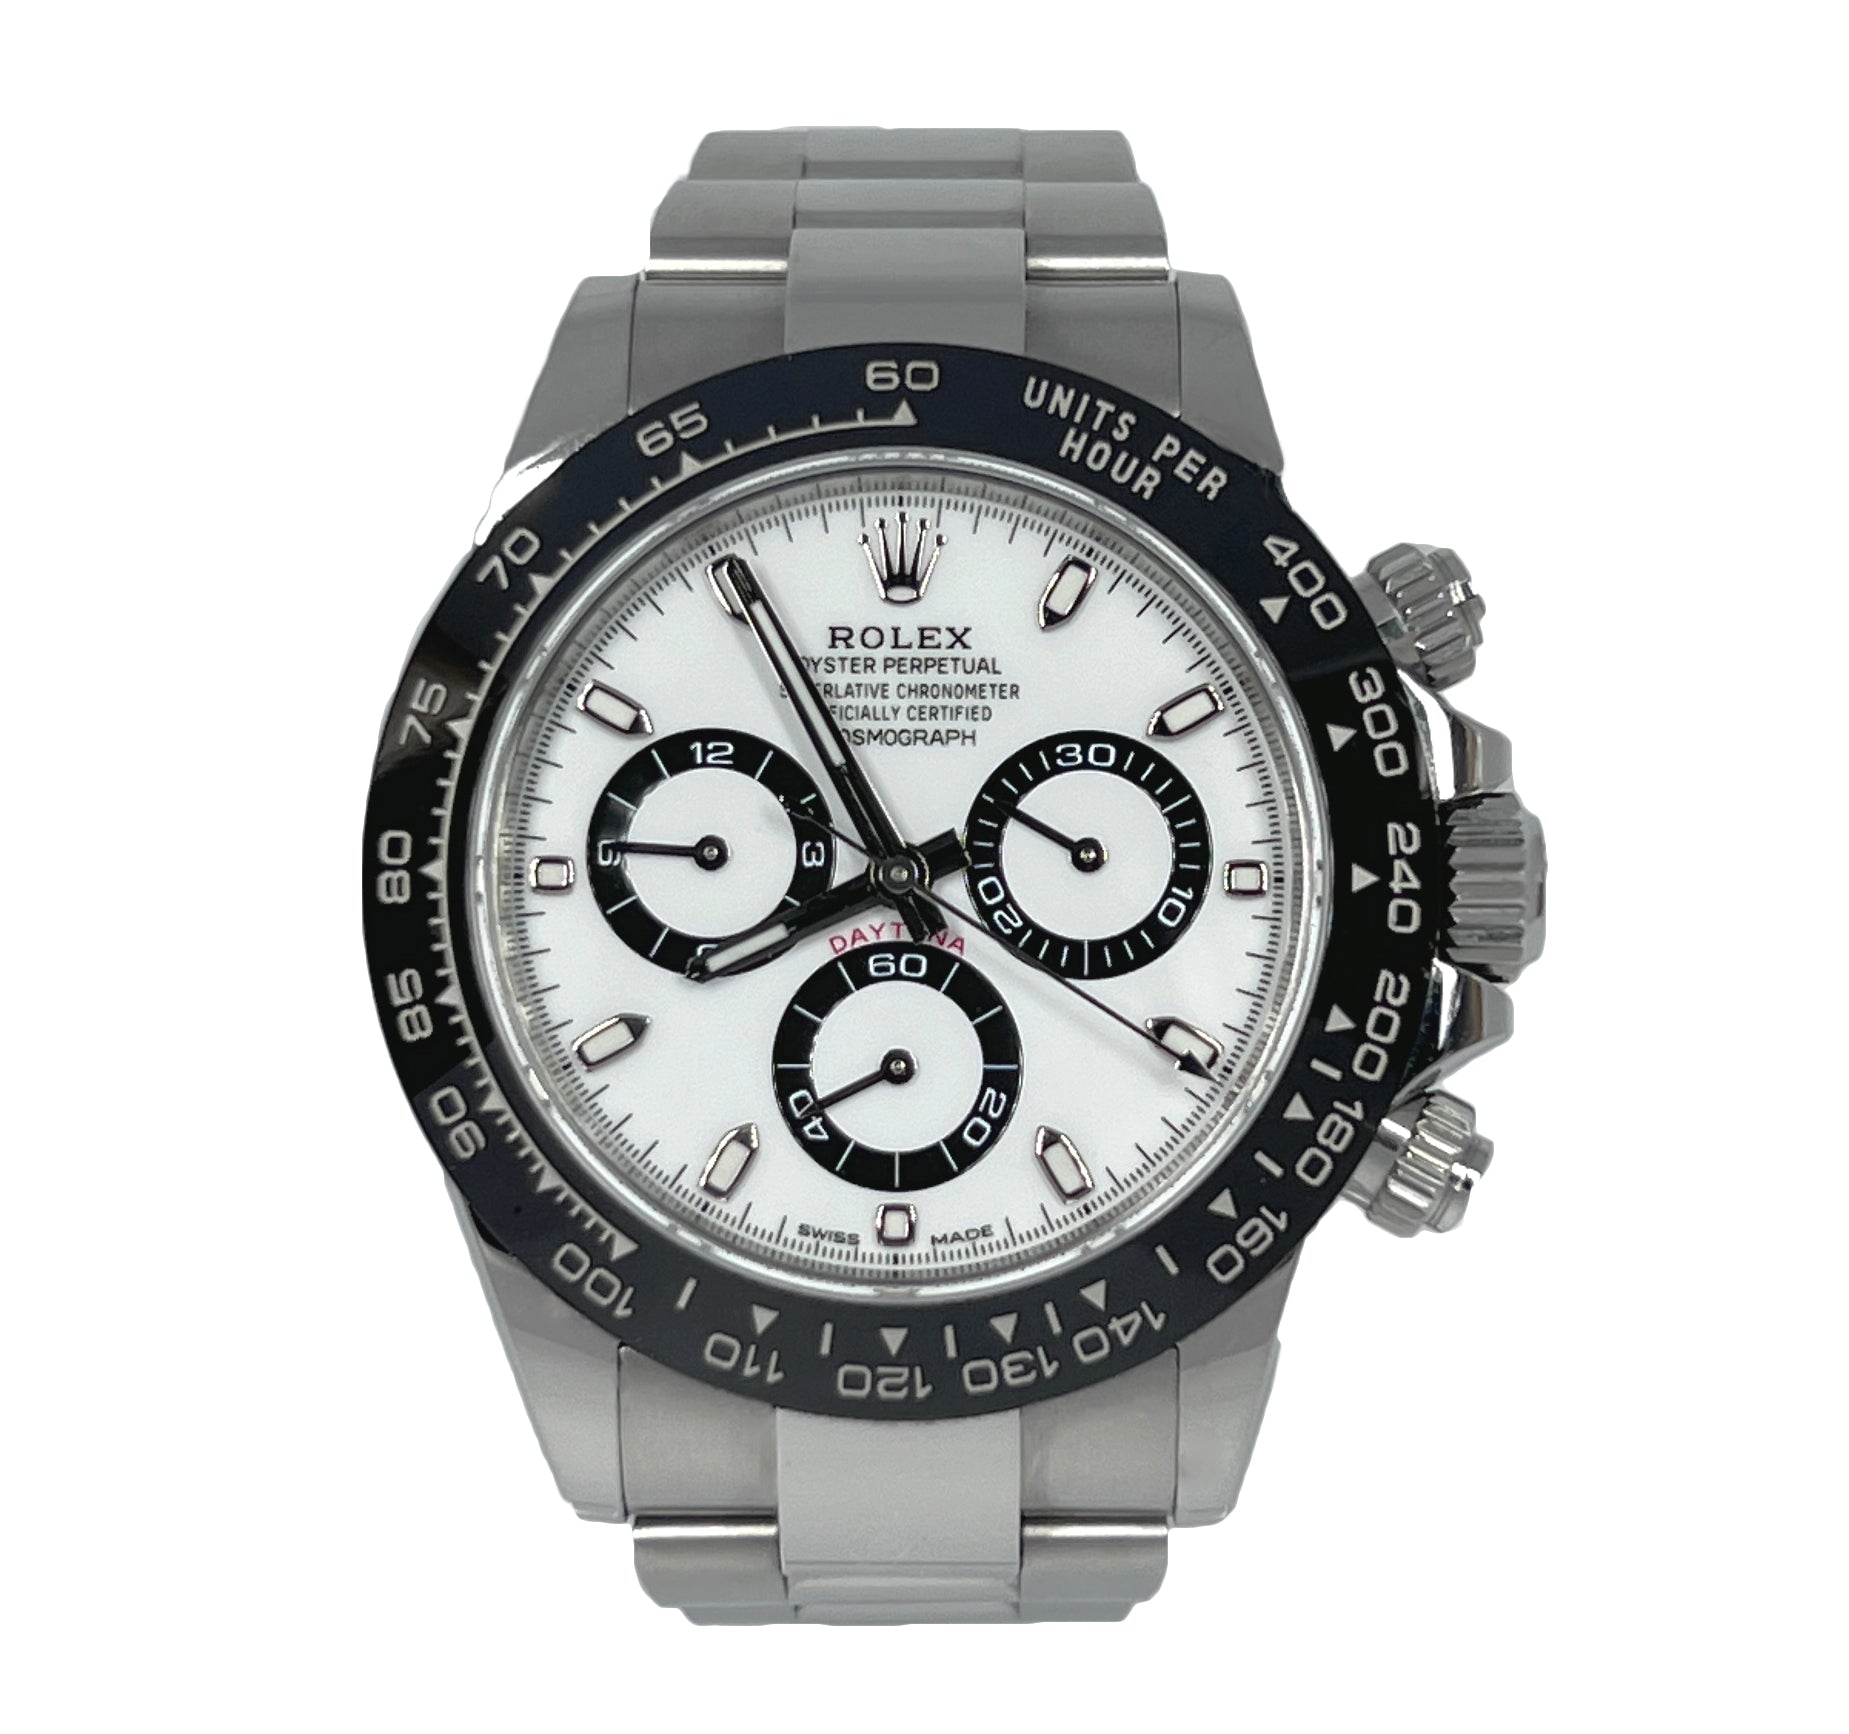 Rolex Oyster Perpetual Cosmograph Daytona Stainless steel Watch